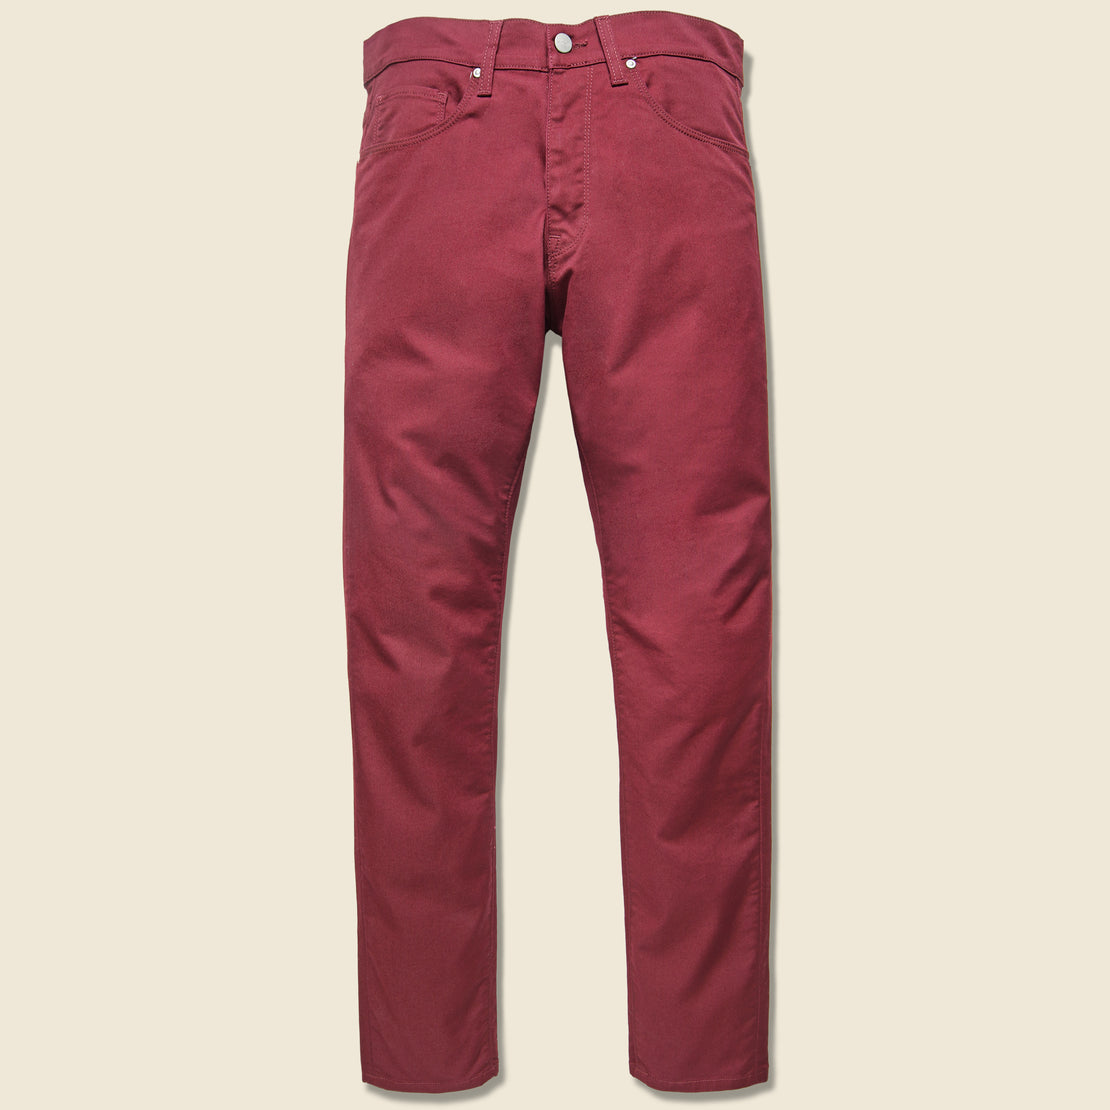 Carhartt WIP Vicious Pant - Mulberry